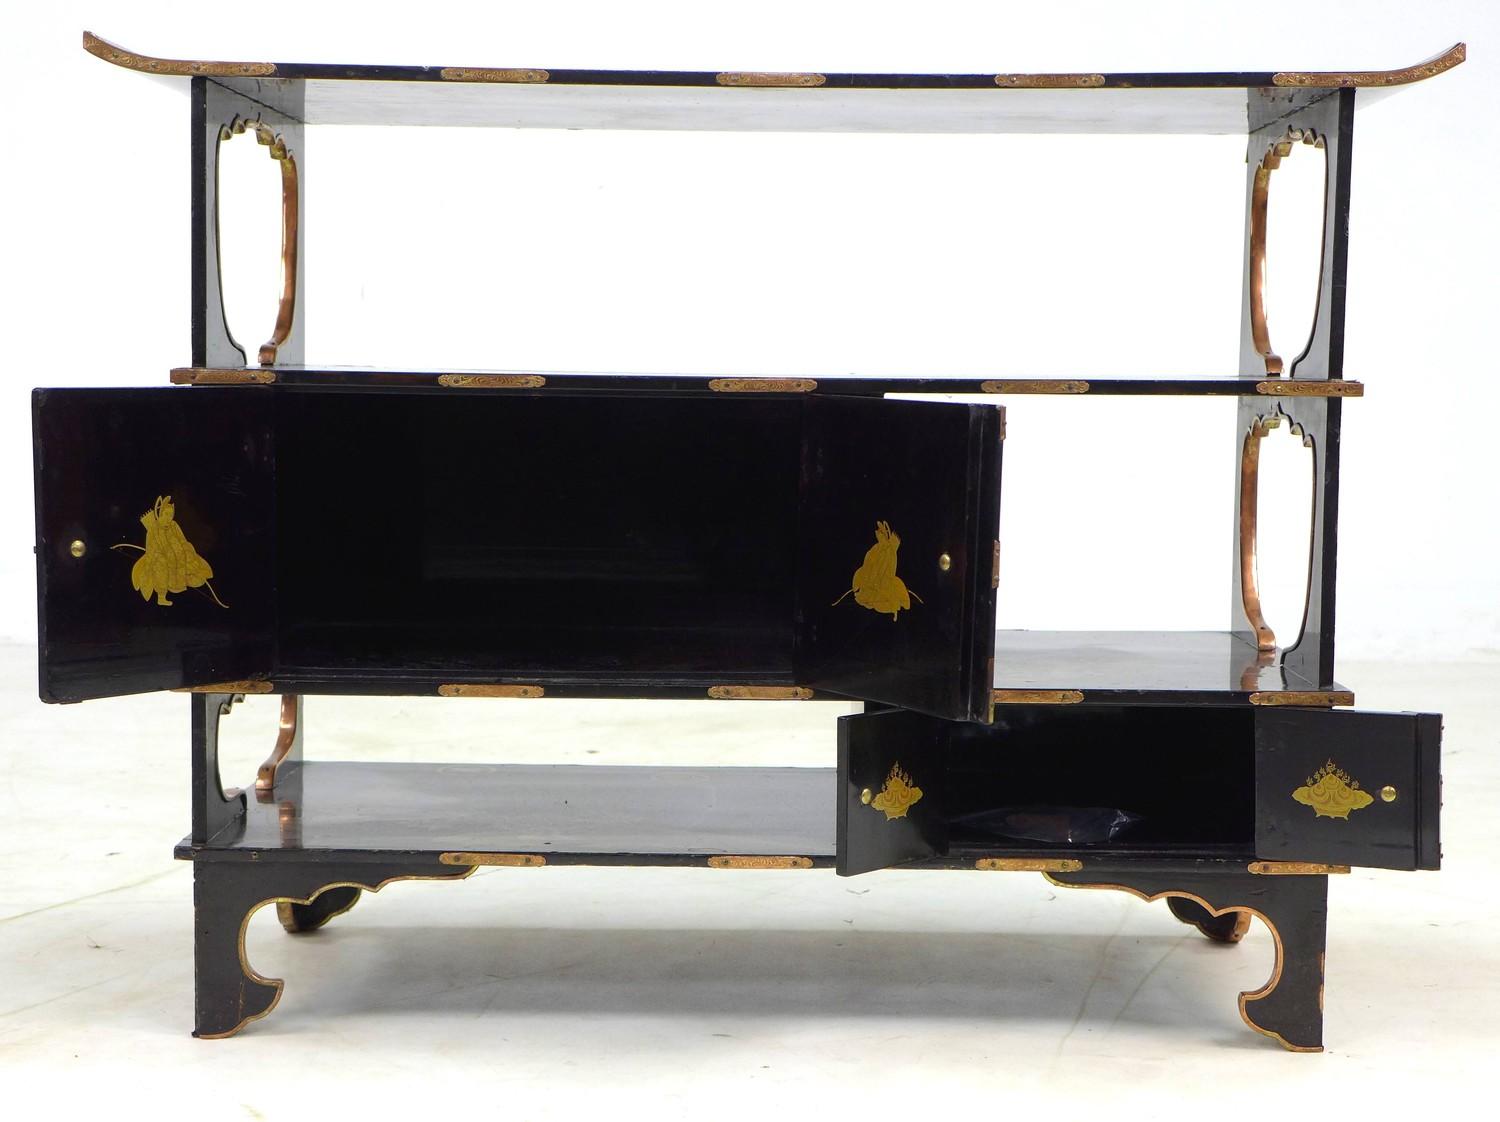 A low Japanese black lacquer shelf unit, Meiji period, with engraved copper mountings, decorated - Image 4 of 9